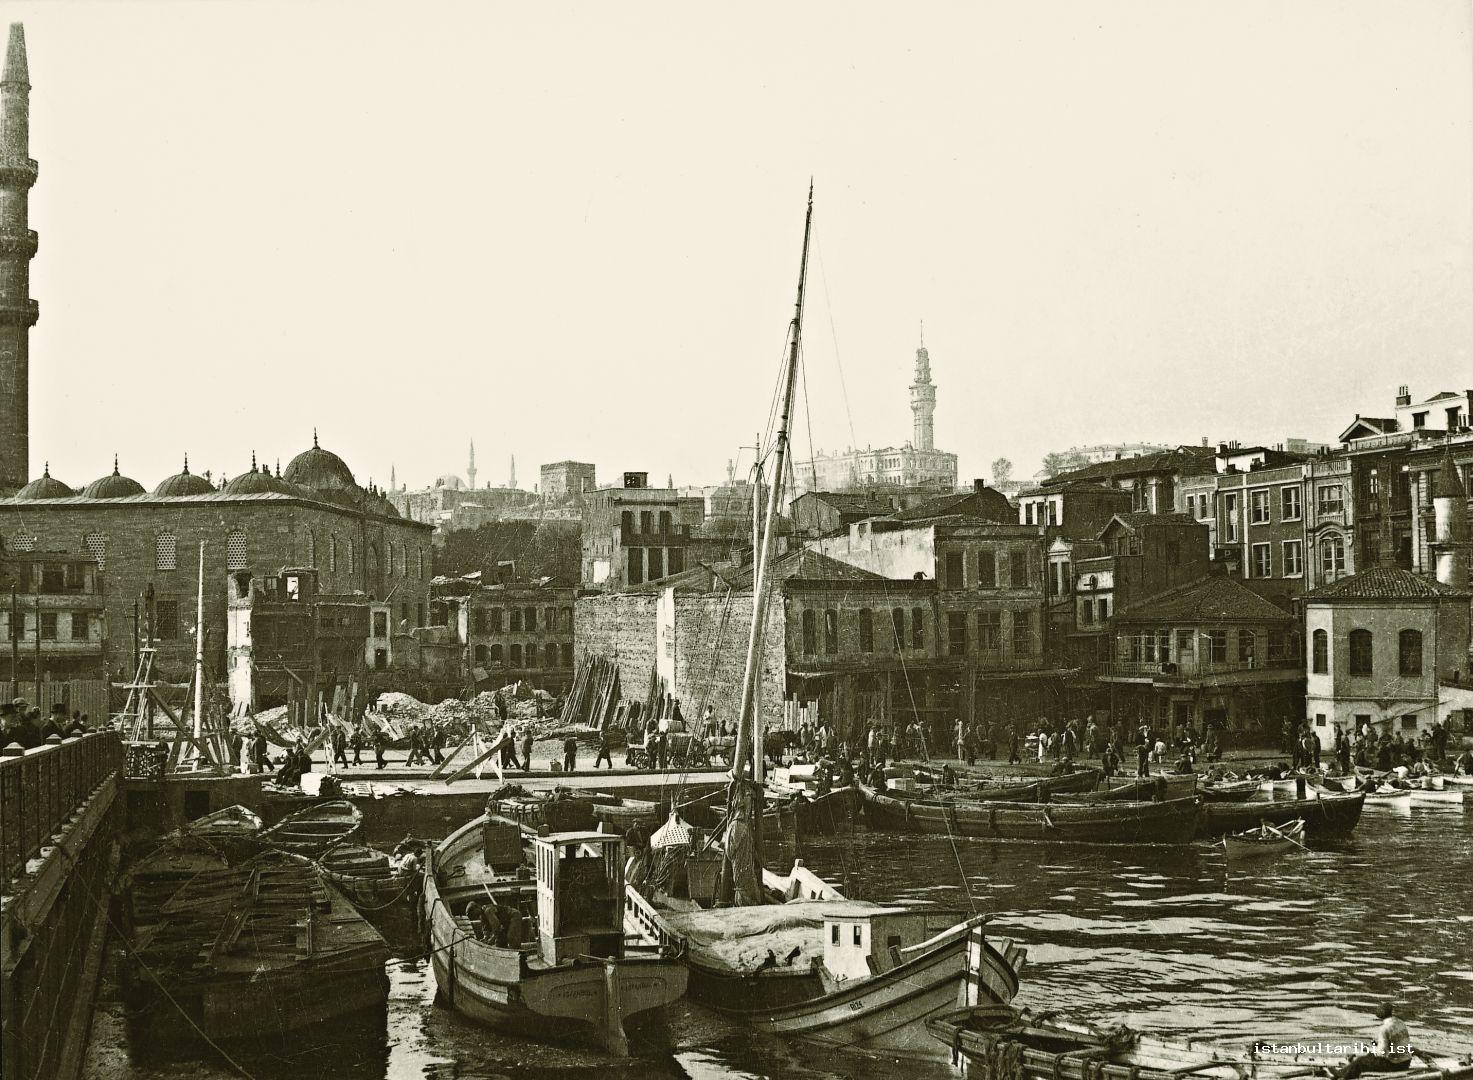 11- The view of Eminönü Square before it was opened and expanded. The Fish Market which was one of the characteristic places of Istanbul and demolished in 1950 is seenon the right side of picture.